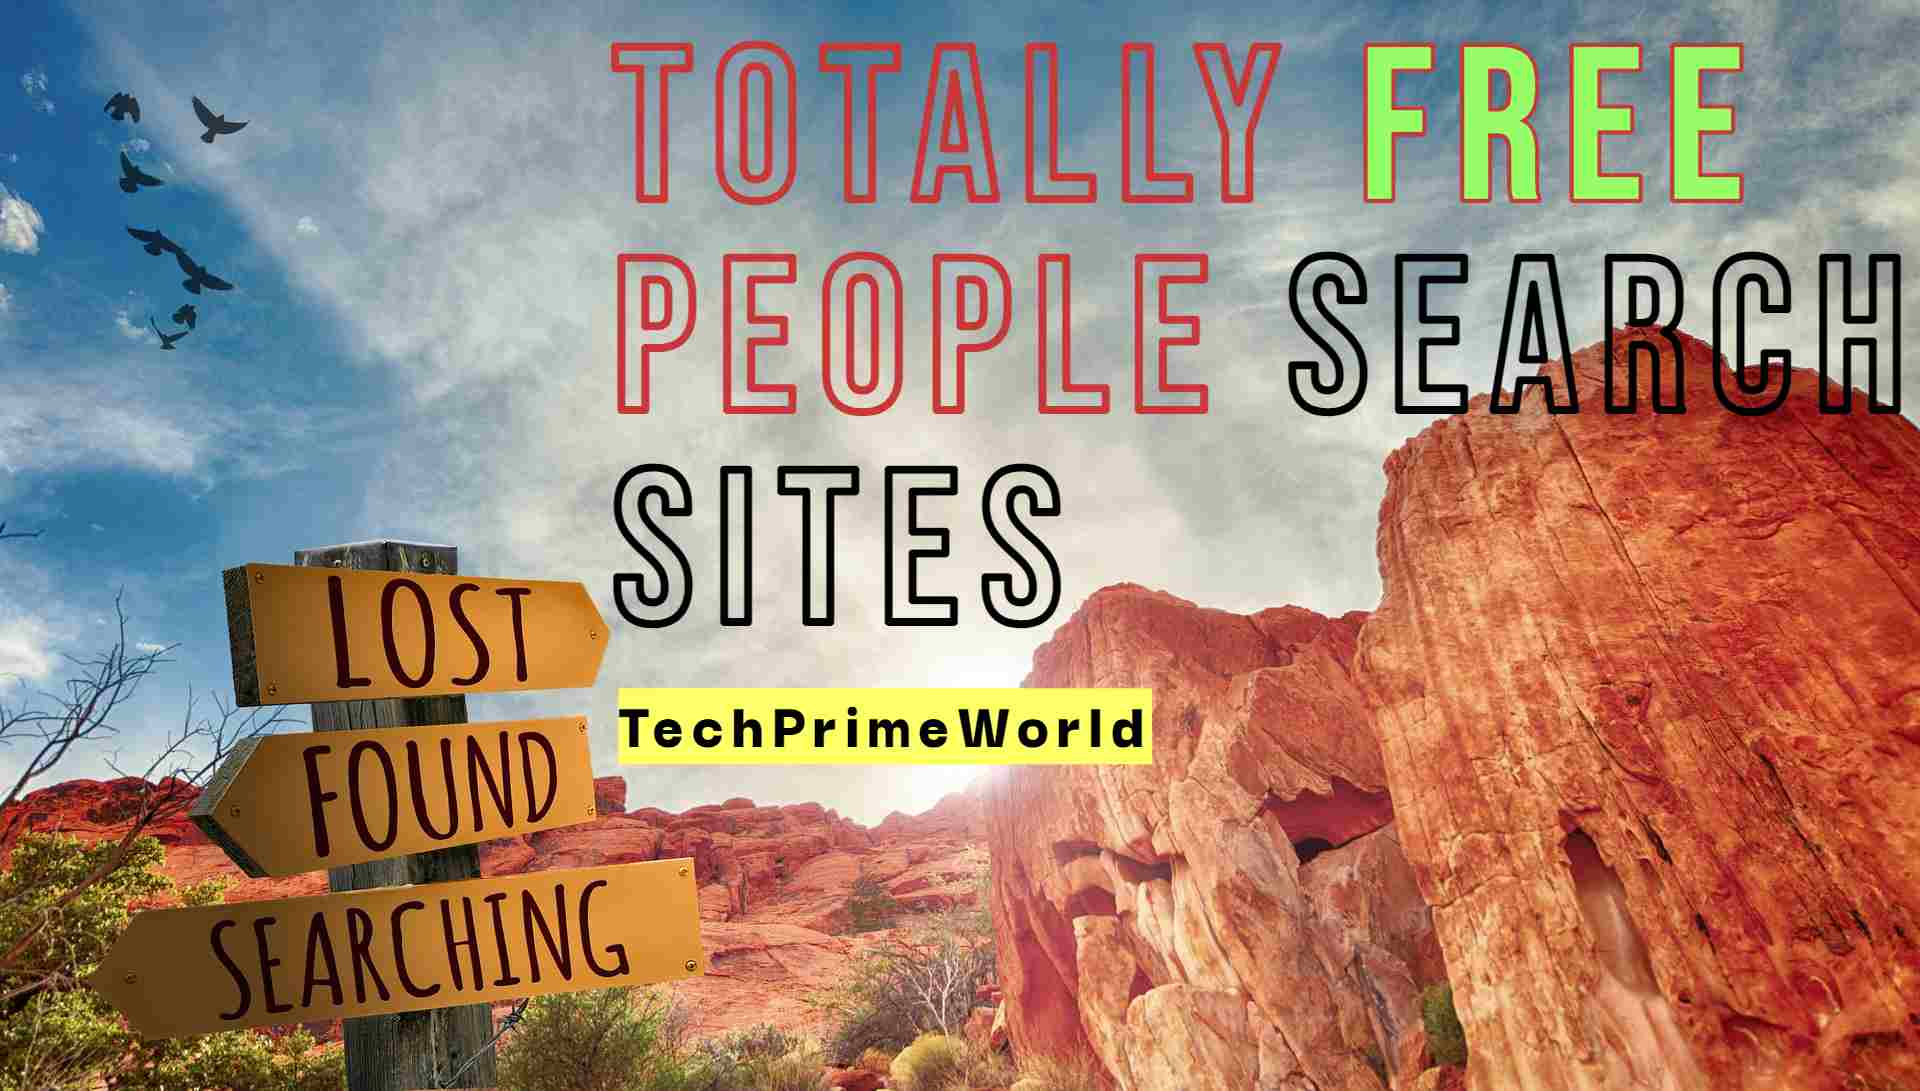 Totally free people search sites